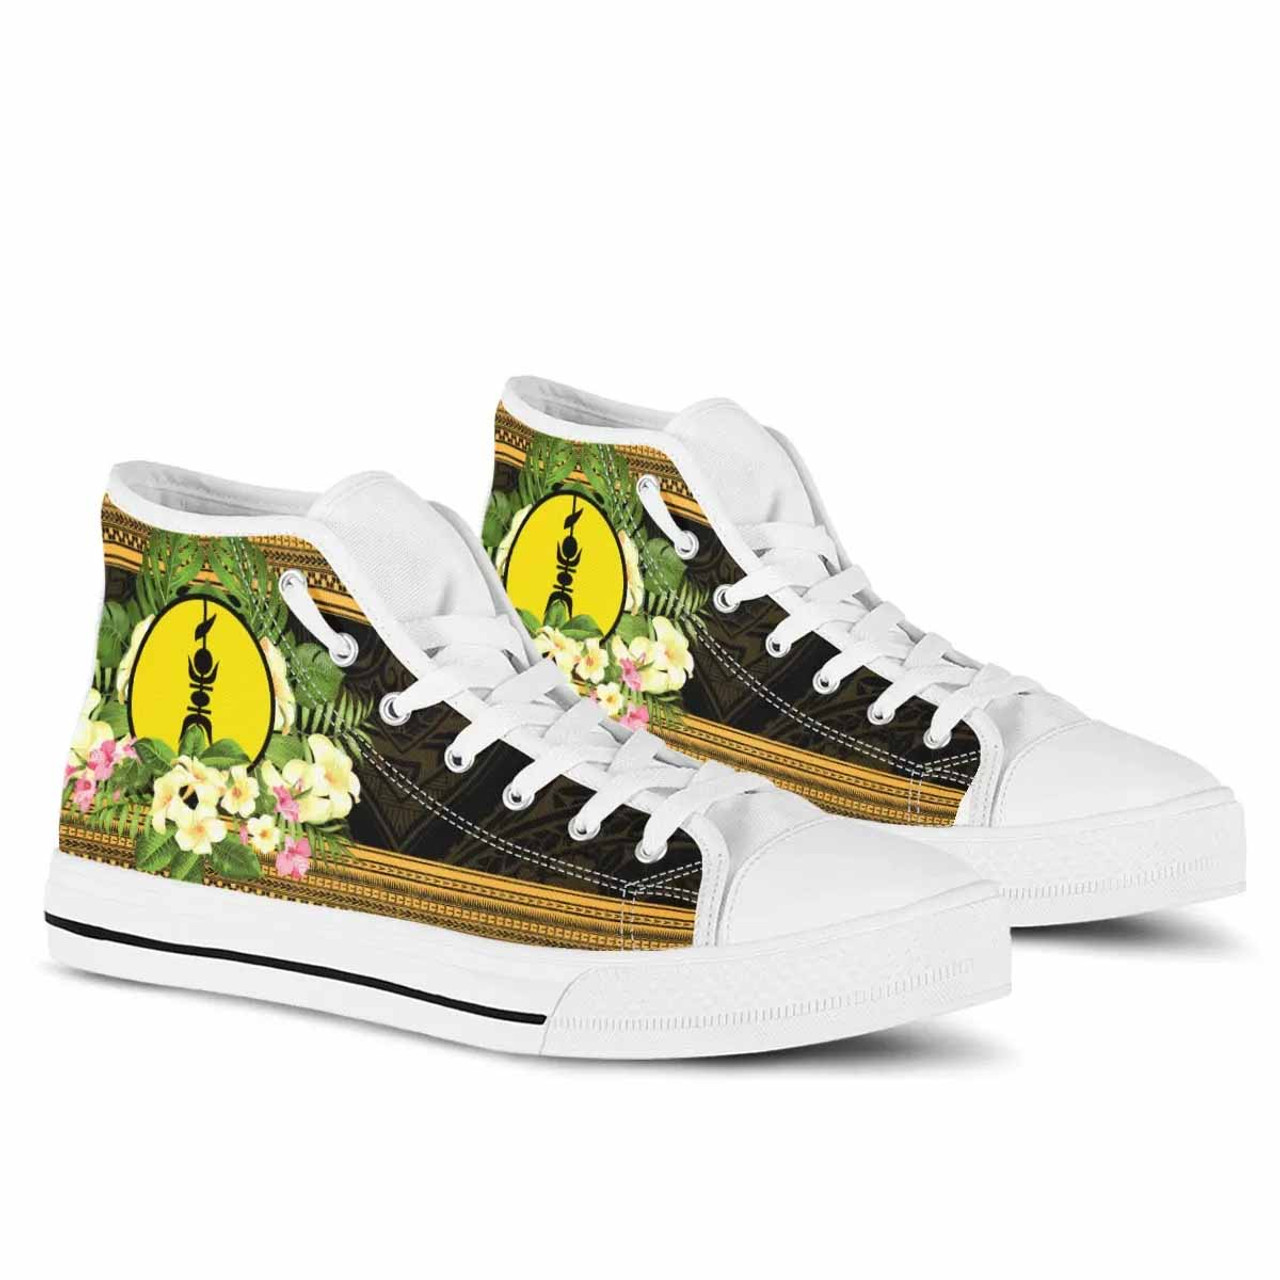 New Caledonia High Top Shoes - Polynesian Gold Patterns Collection 8